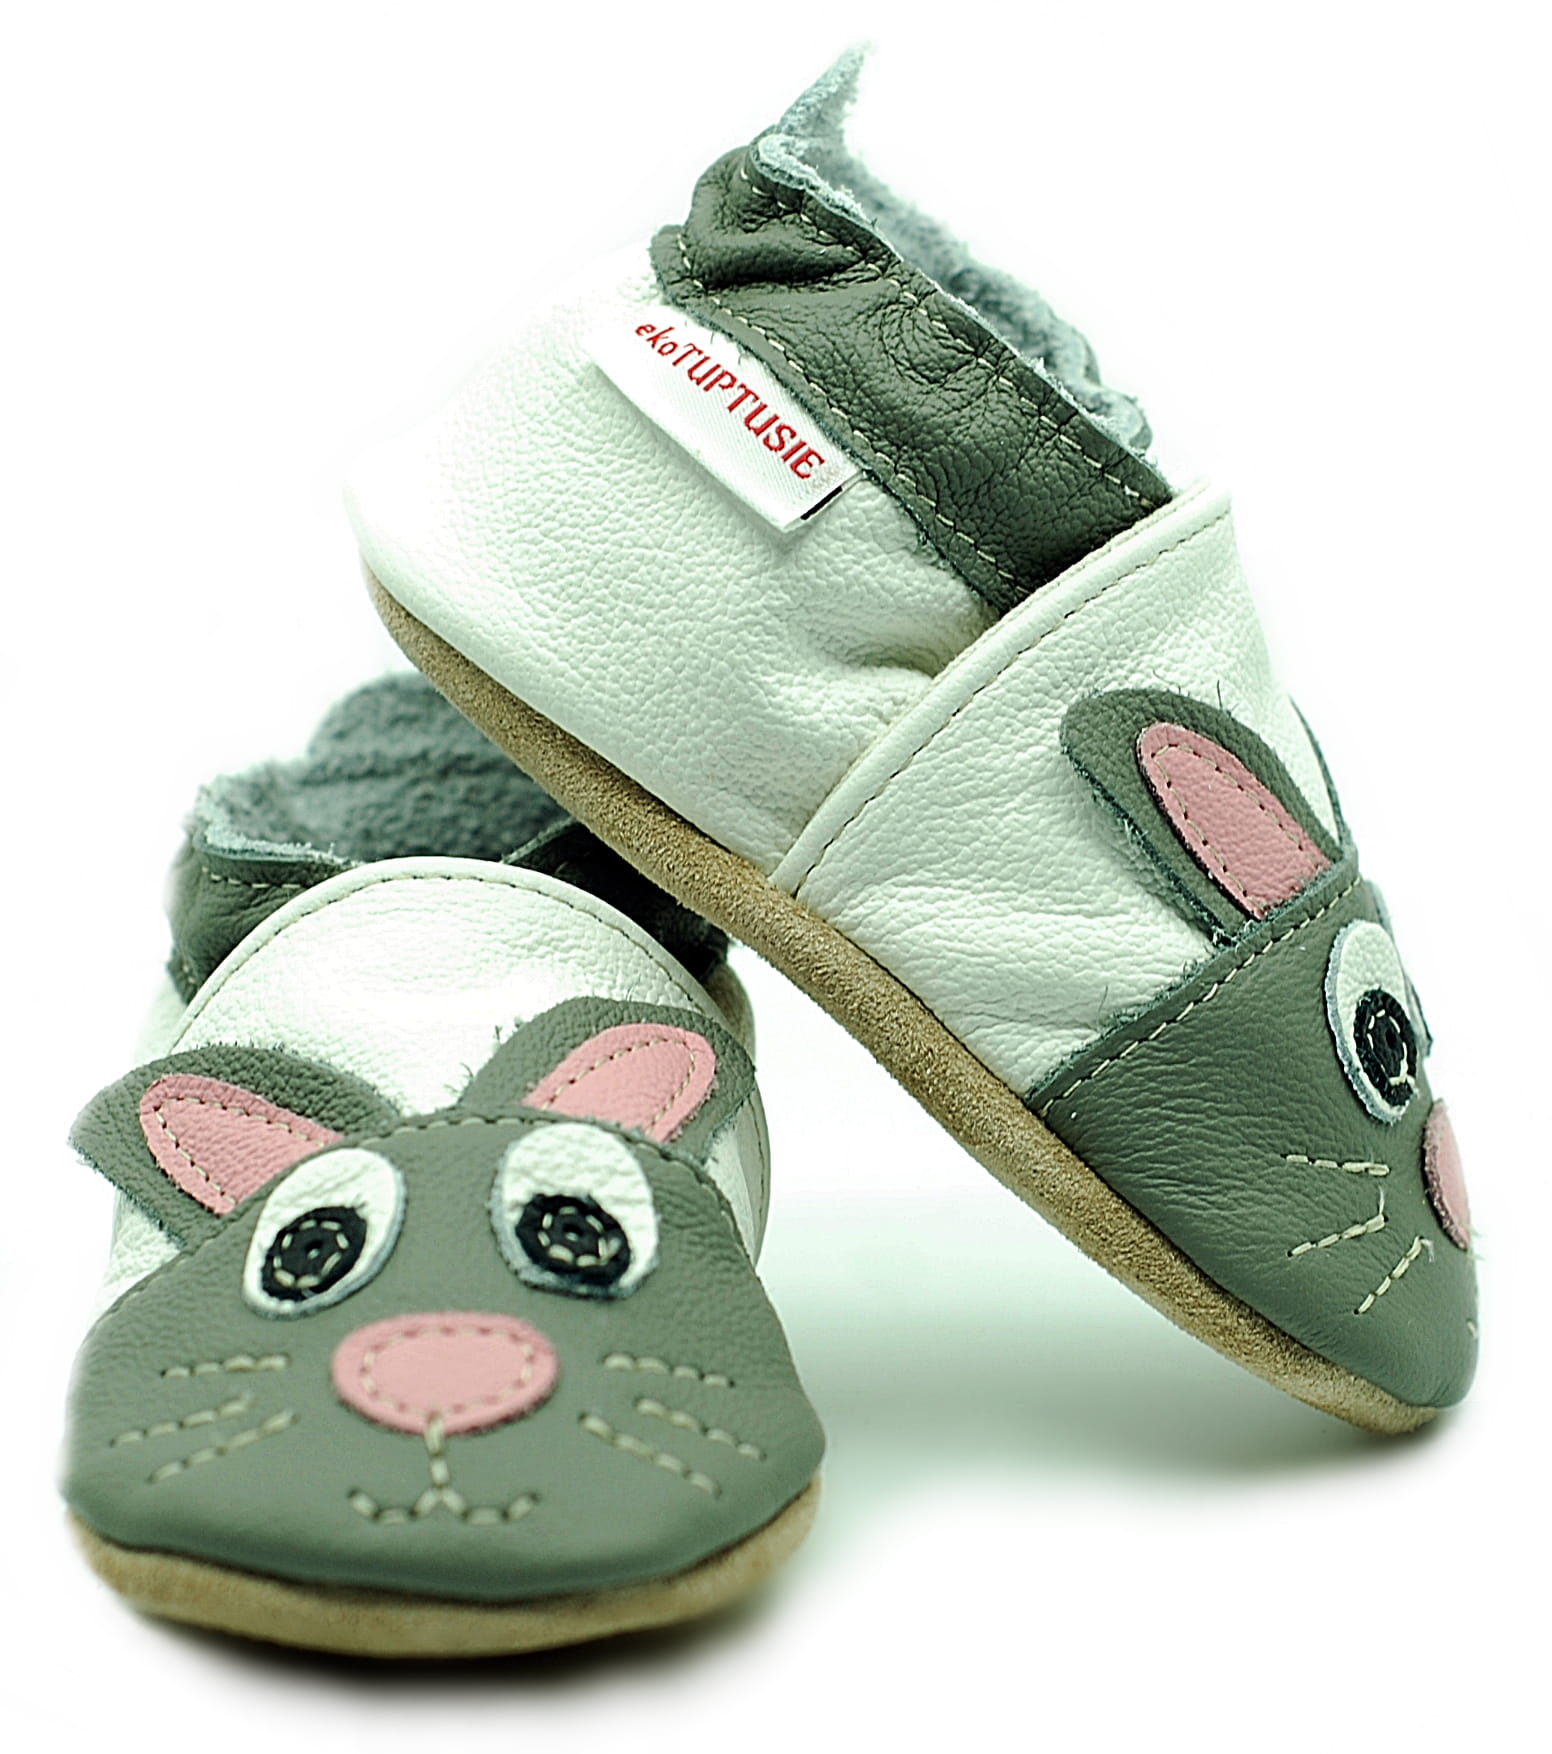 chausson-cuir-lapin-EkoTuptusie-Libertypieds(1)